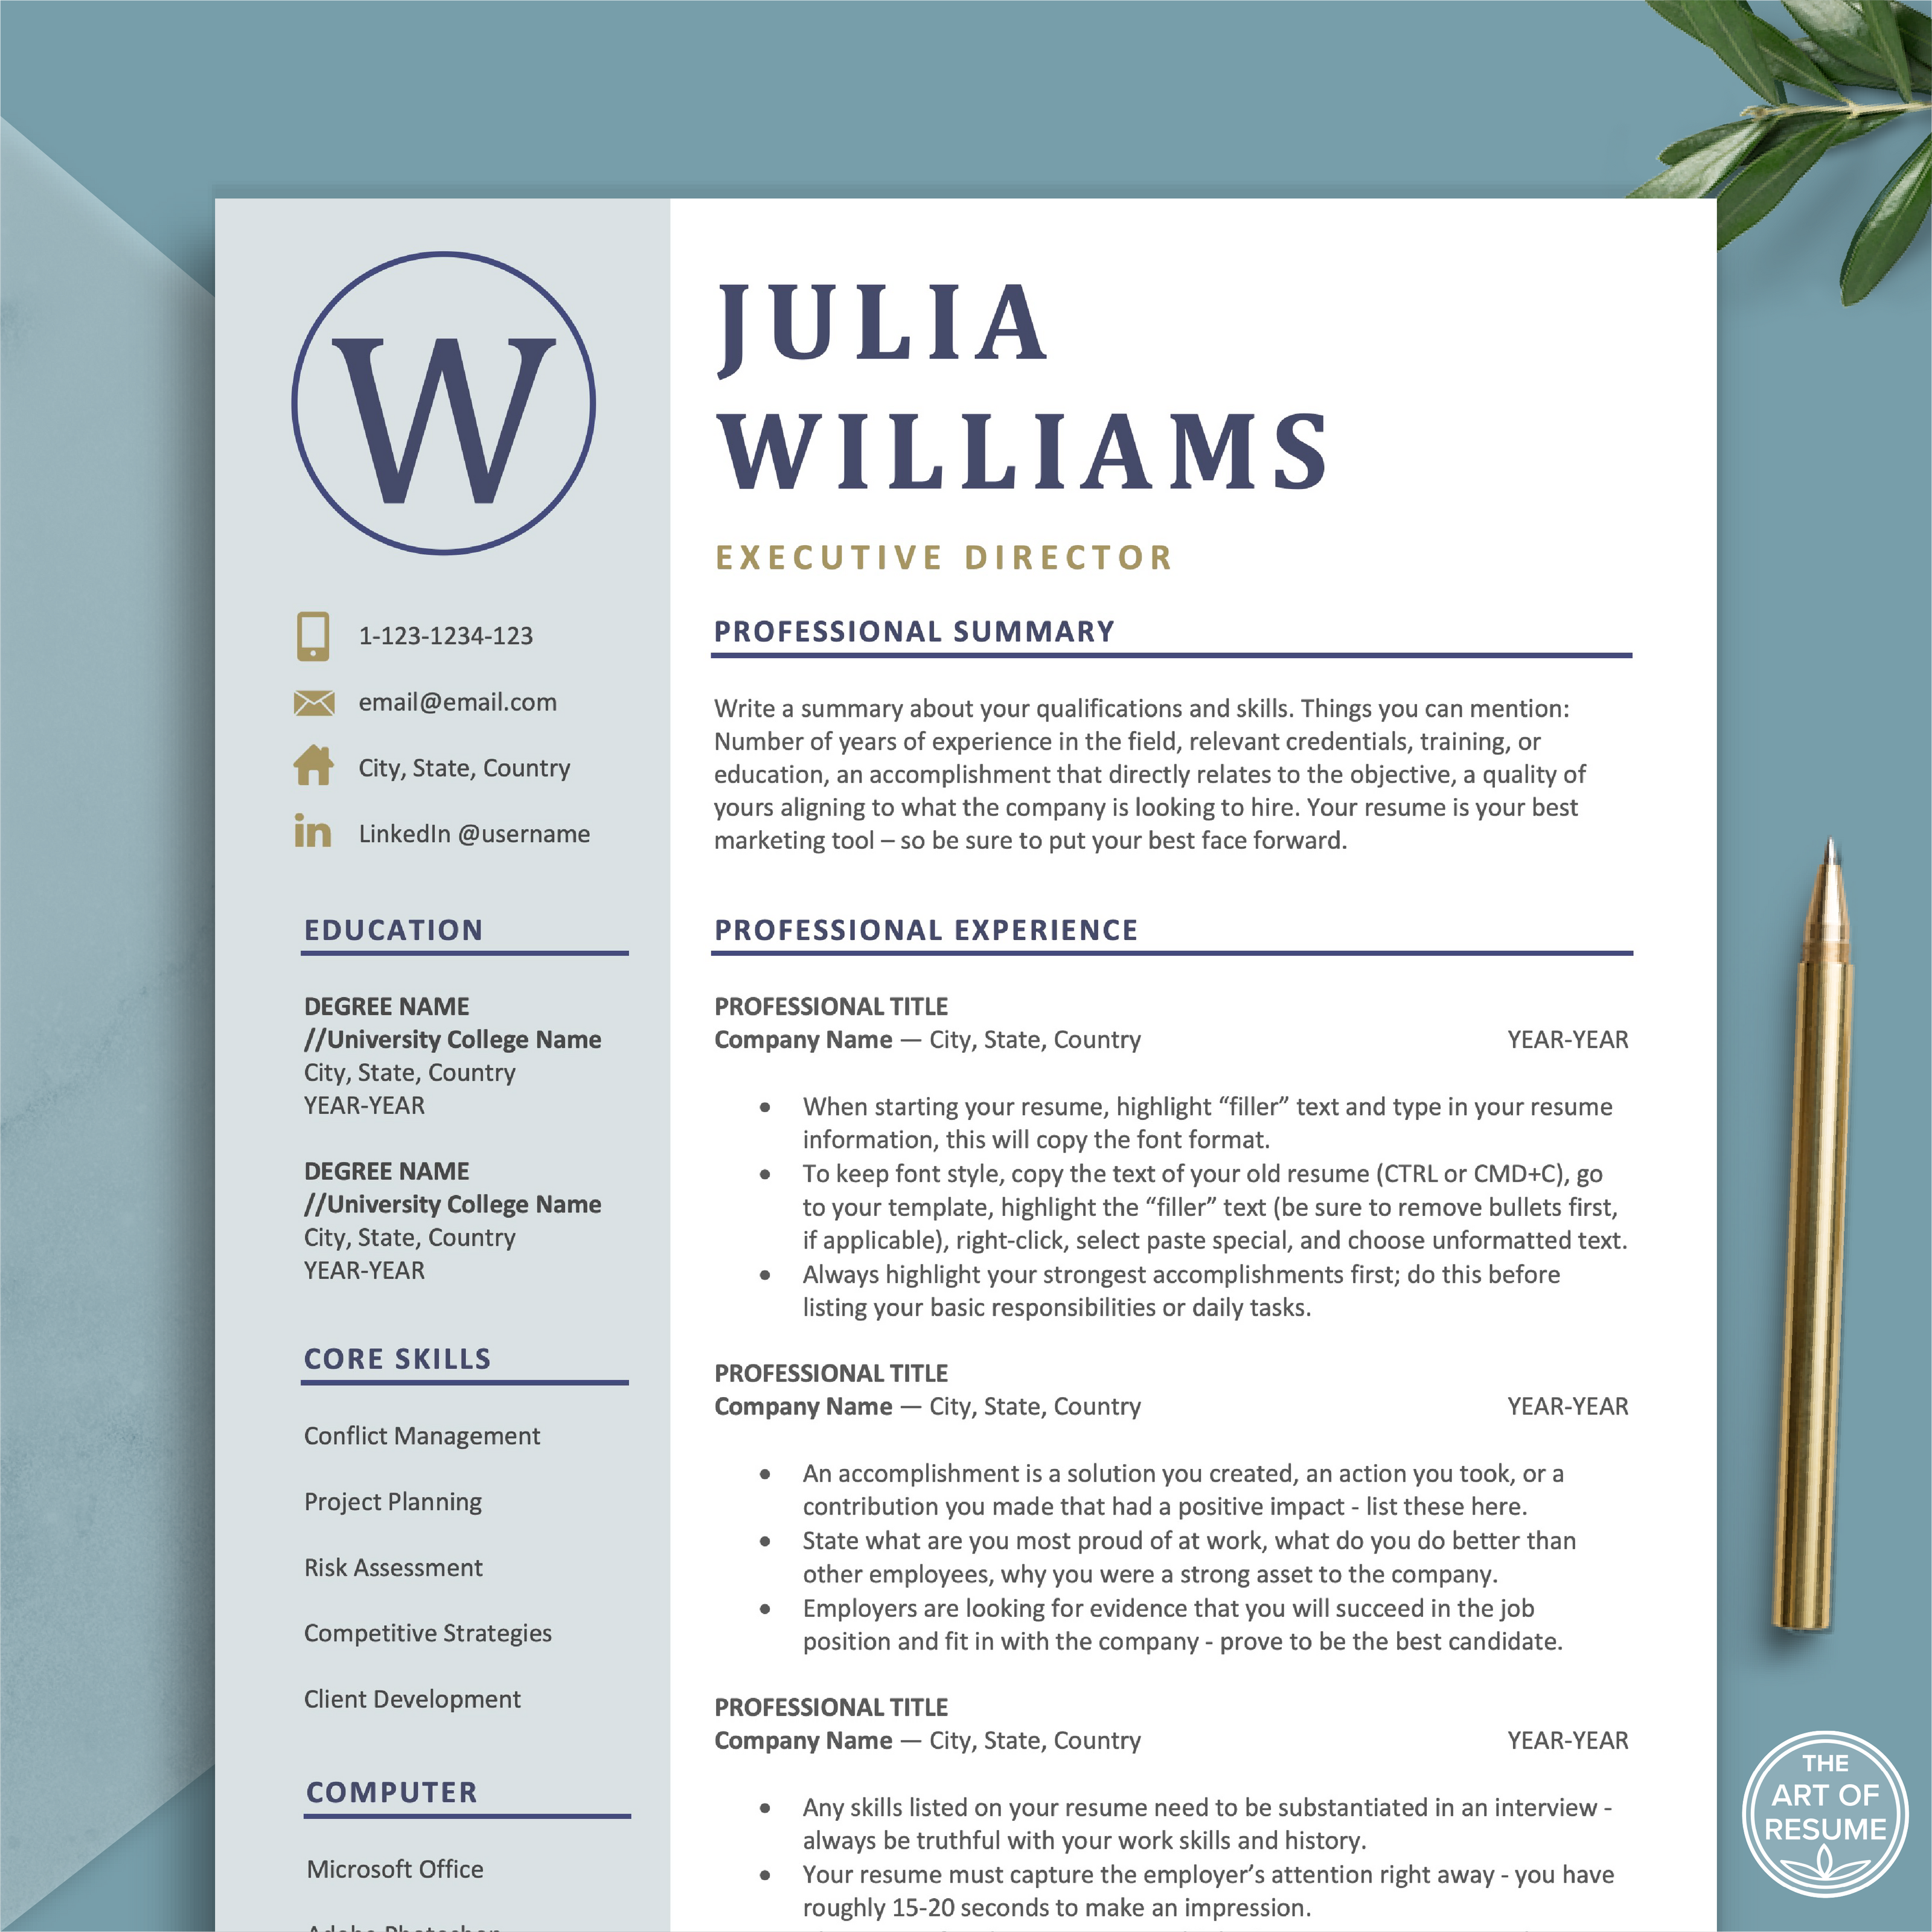 The Art of Resume Template | Blue Professional Executive Resume Template Design